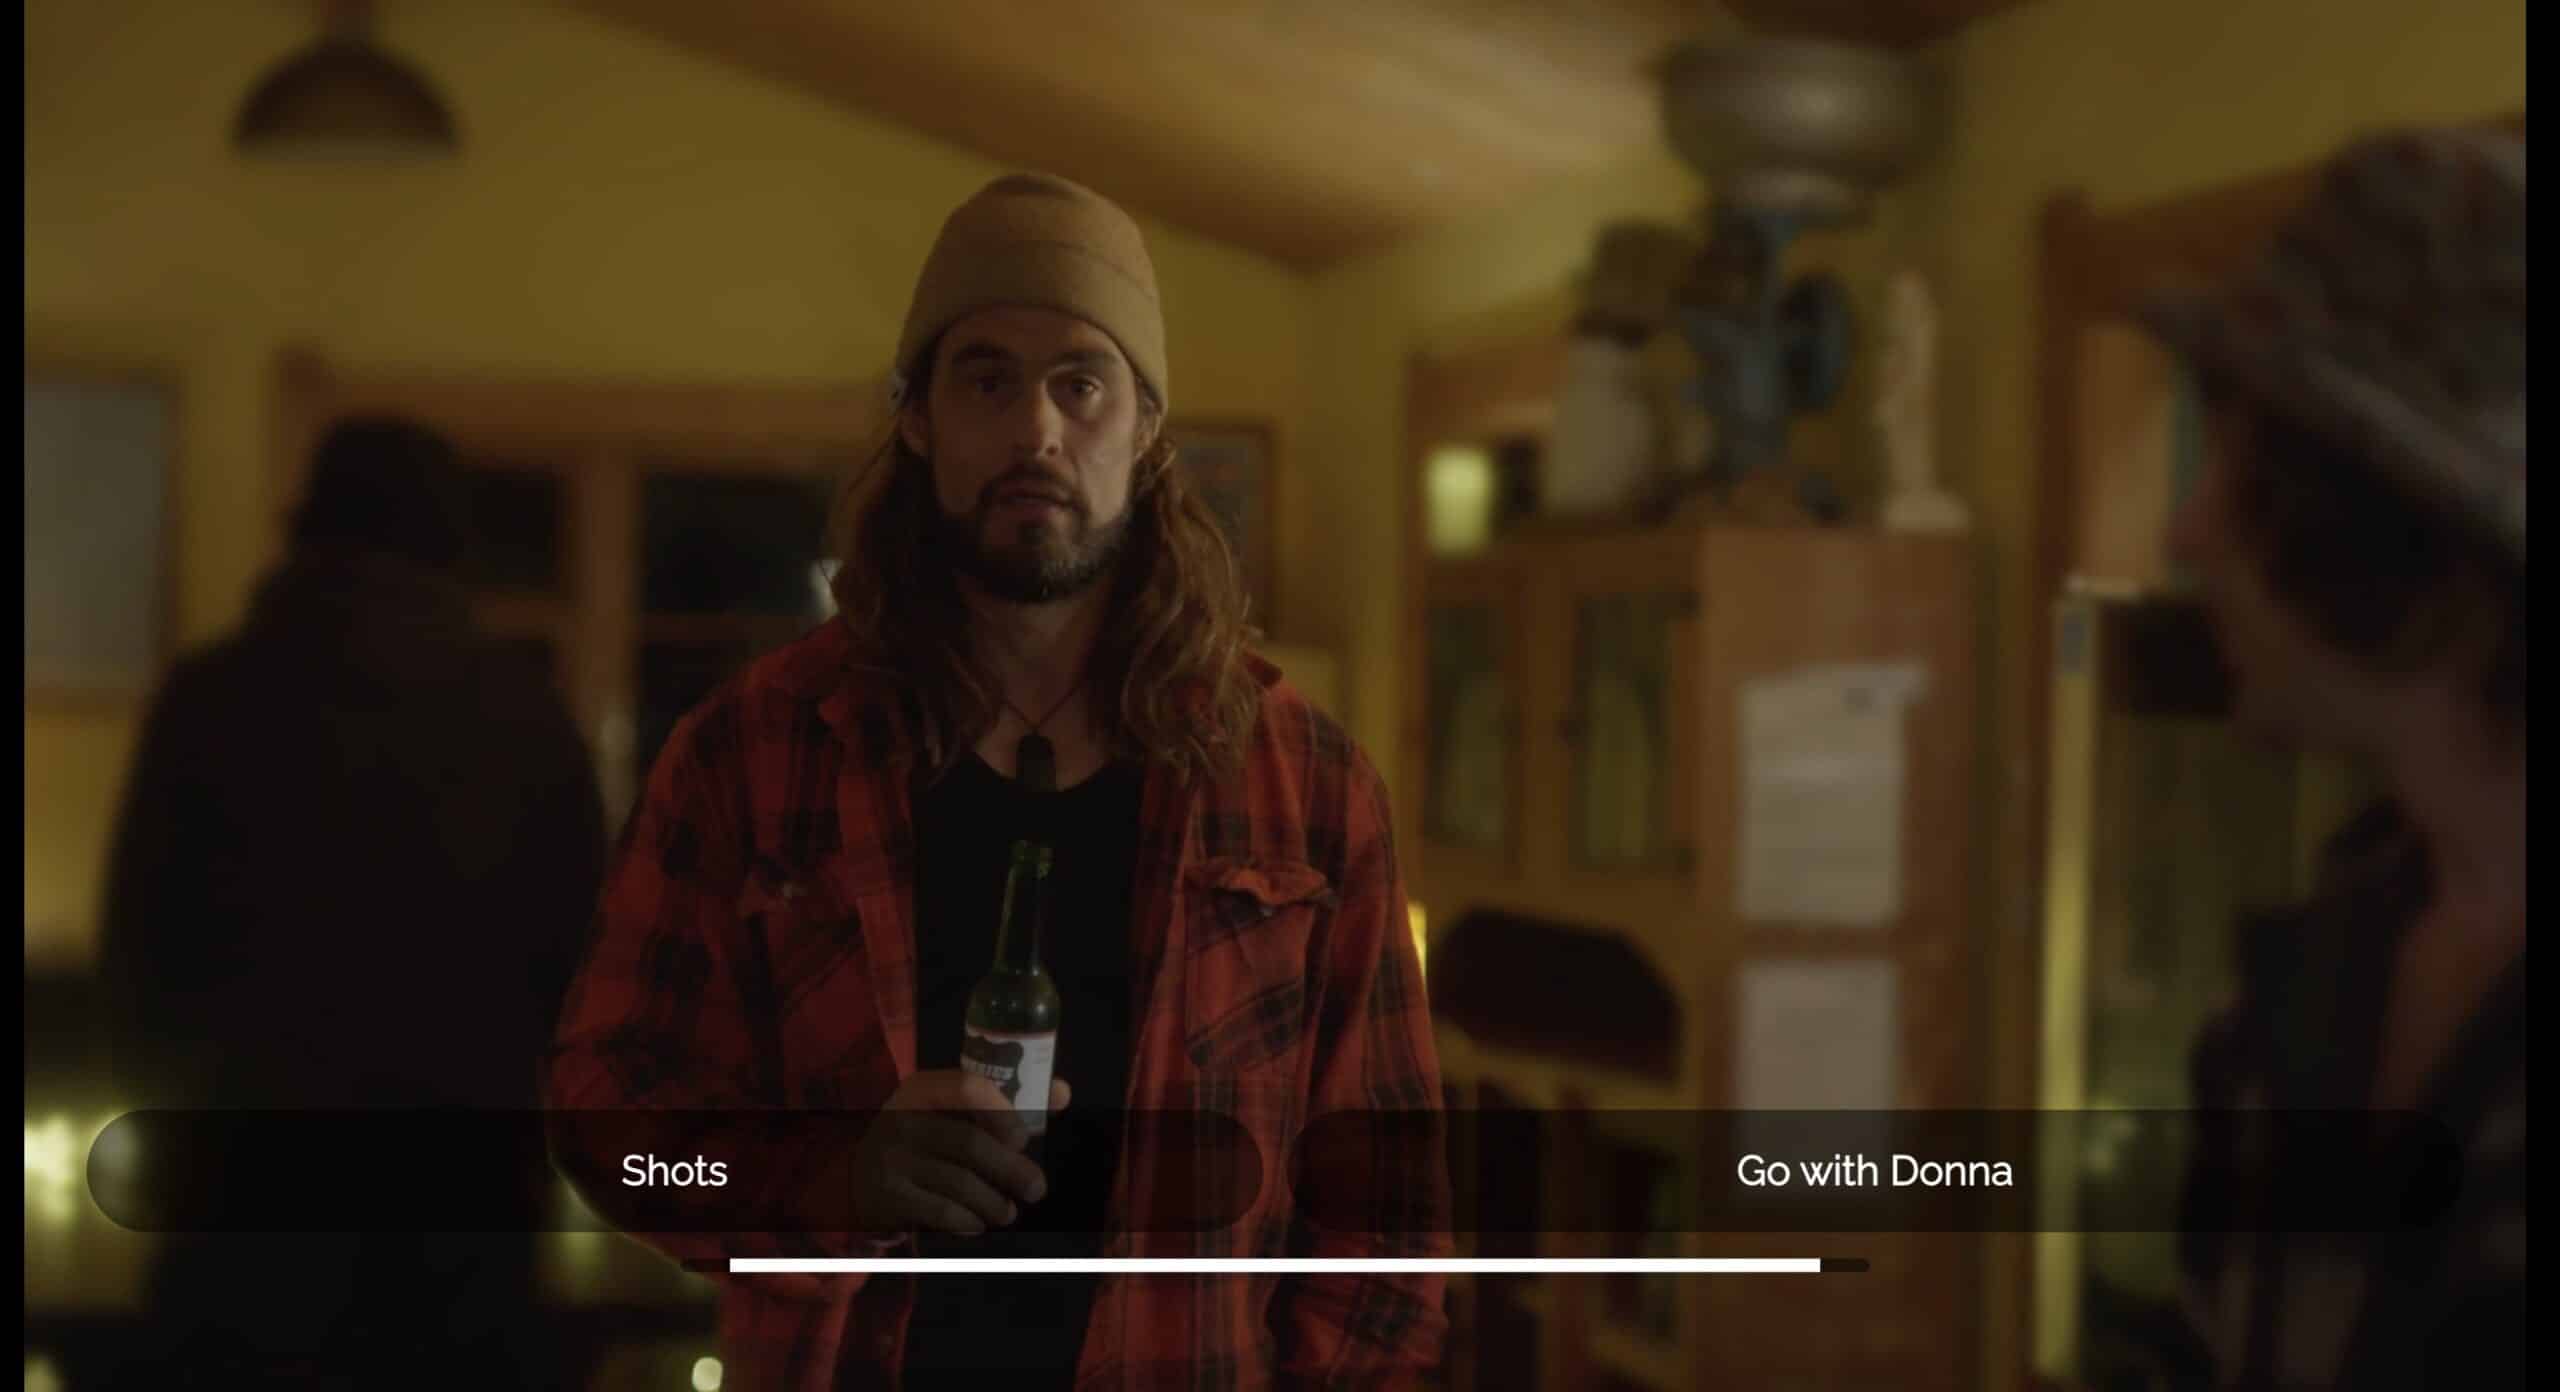 The Party - a man has a bottle of beer and is one screen with two choices for the viewer to click = "shots" or "go with Donna"